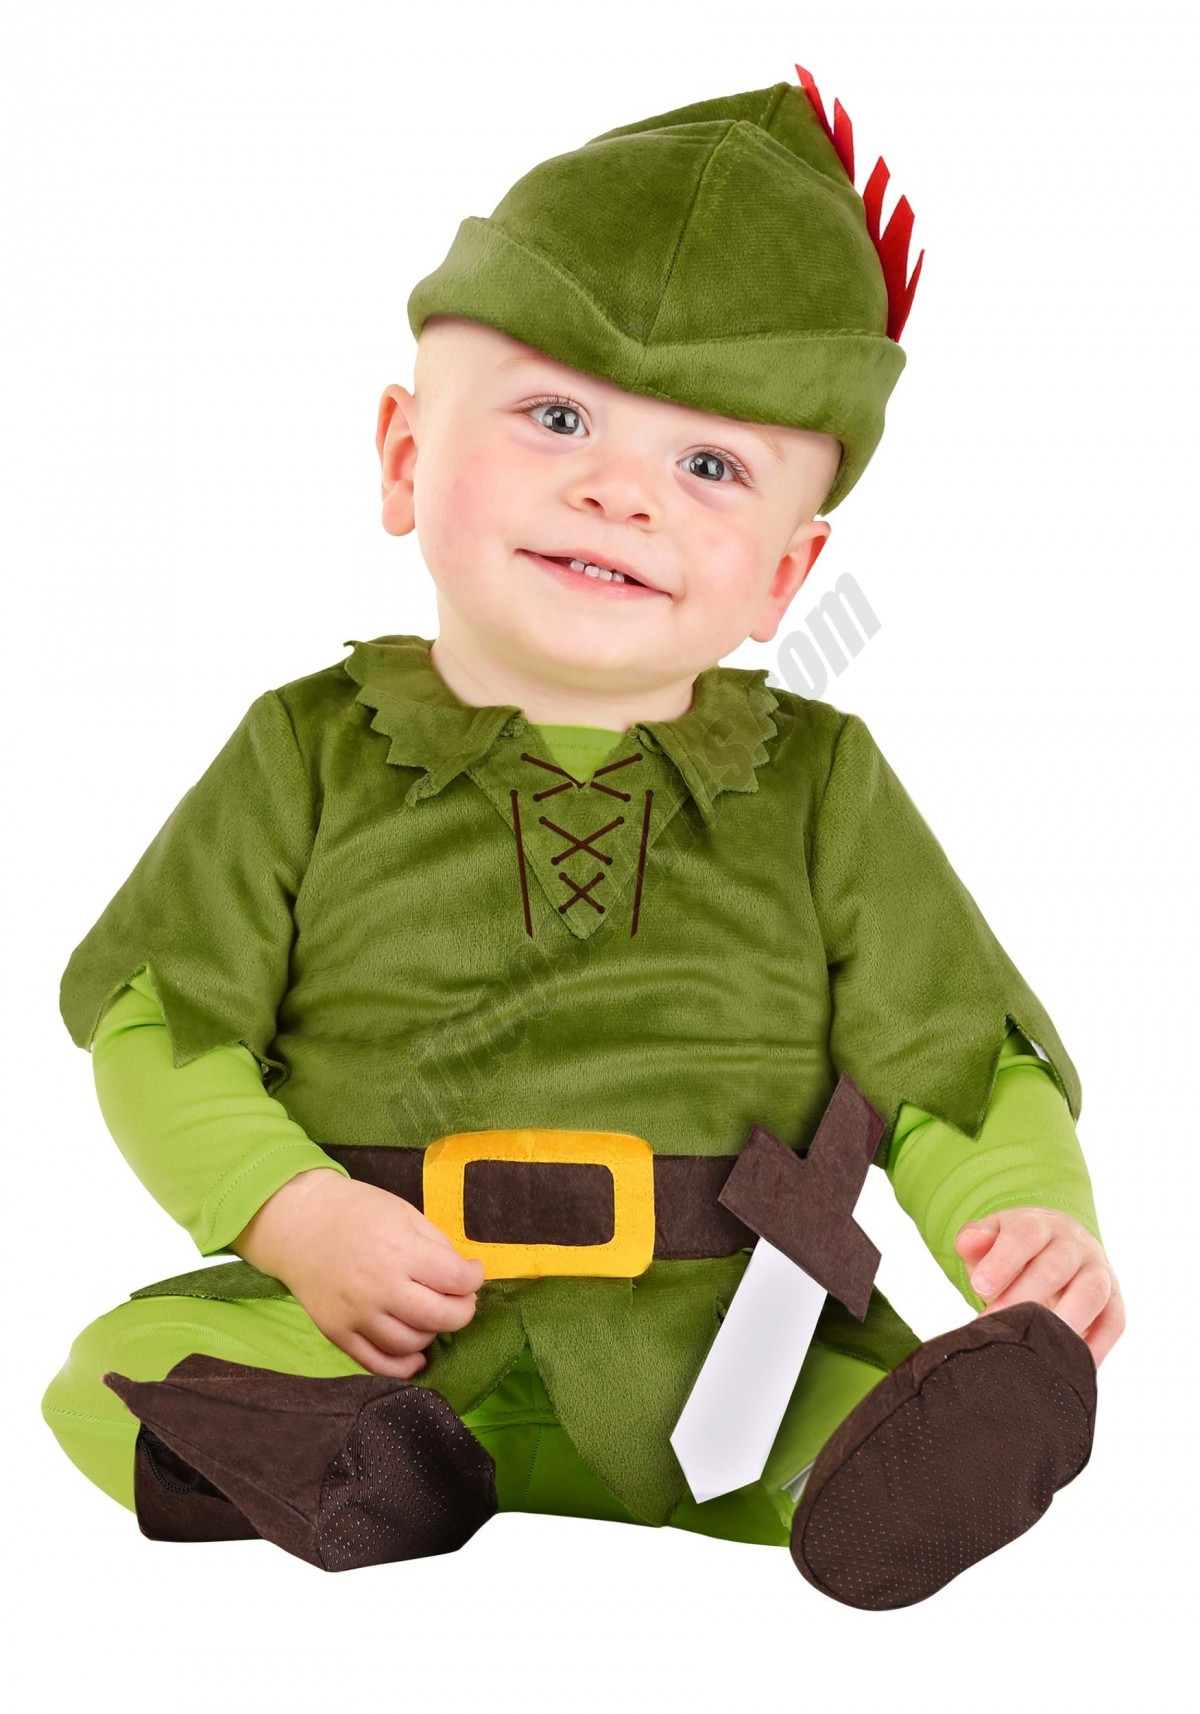 Peter Pan Costume for Infants Promotions - -0